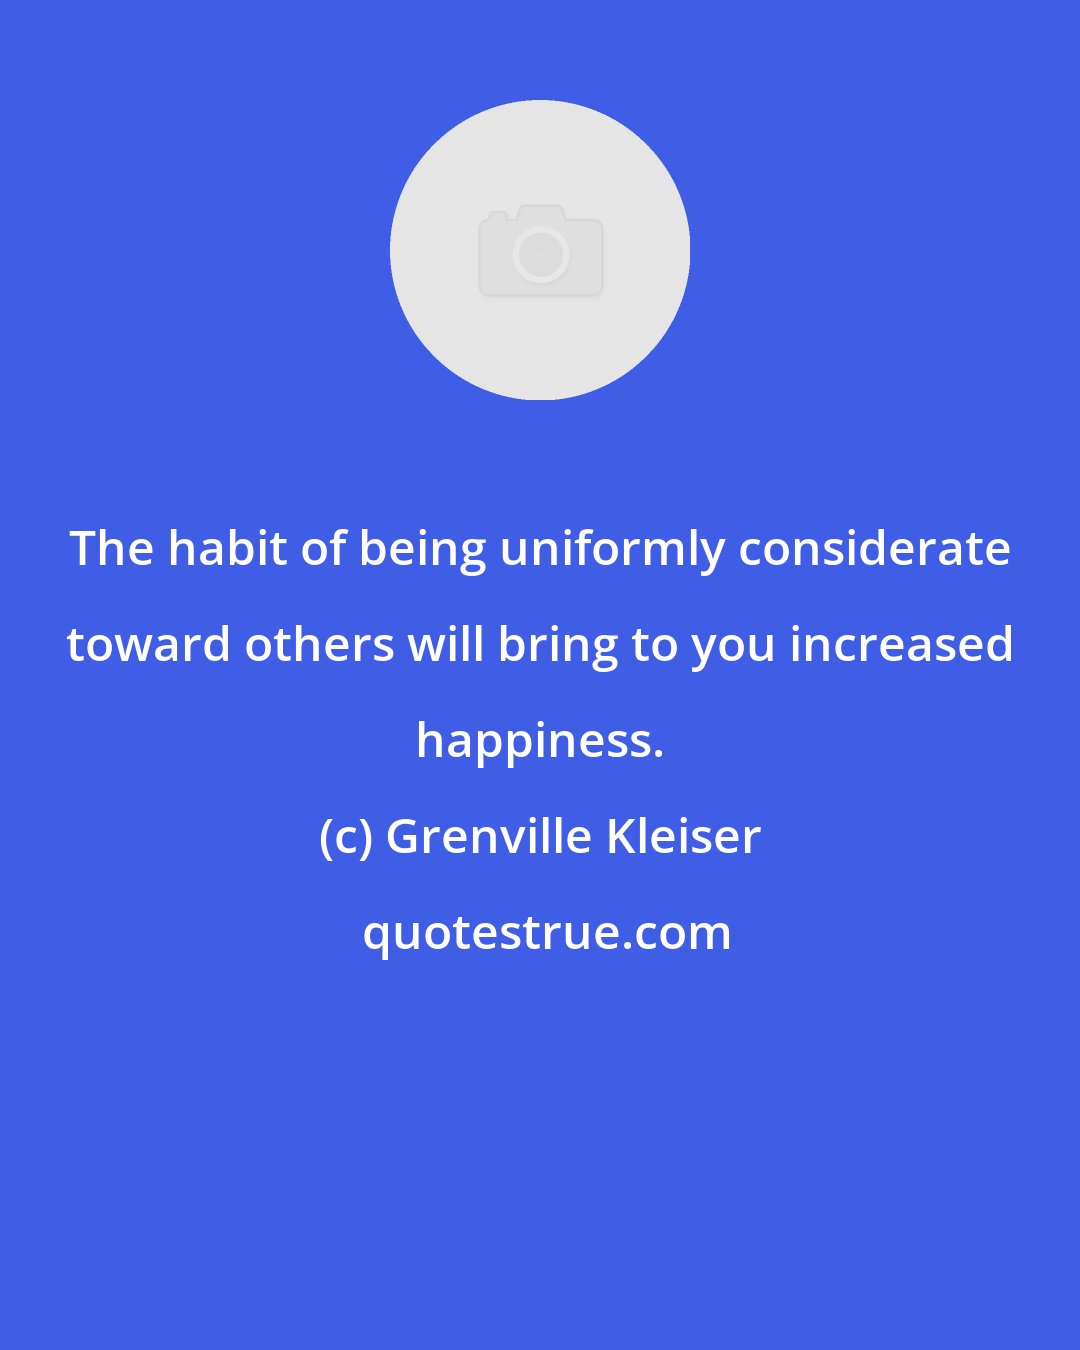 Grenville Kleiser: The habit of being uniformly considerate toward others will bring to you increased happiness.